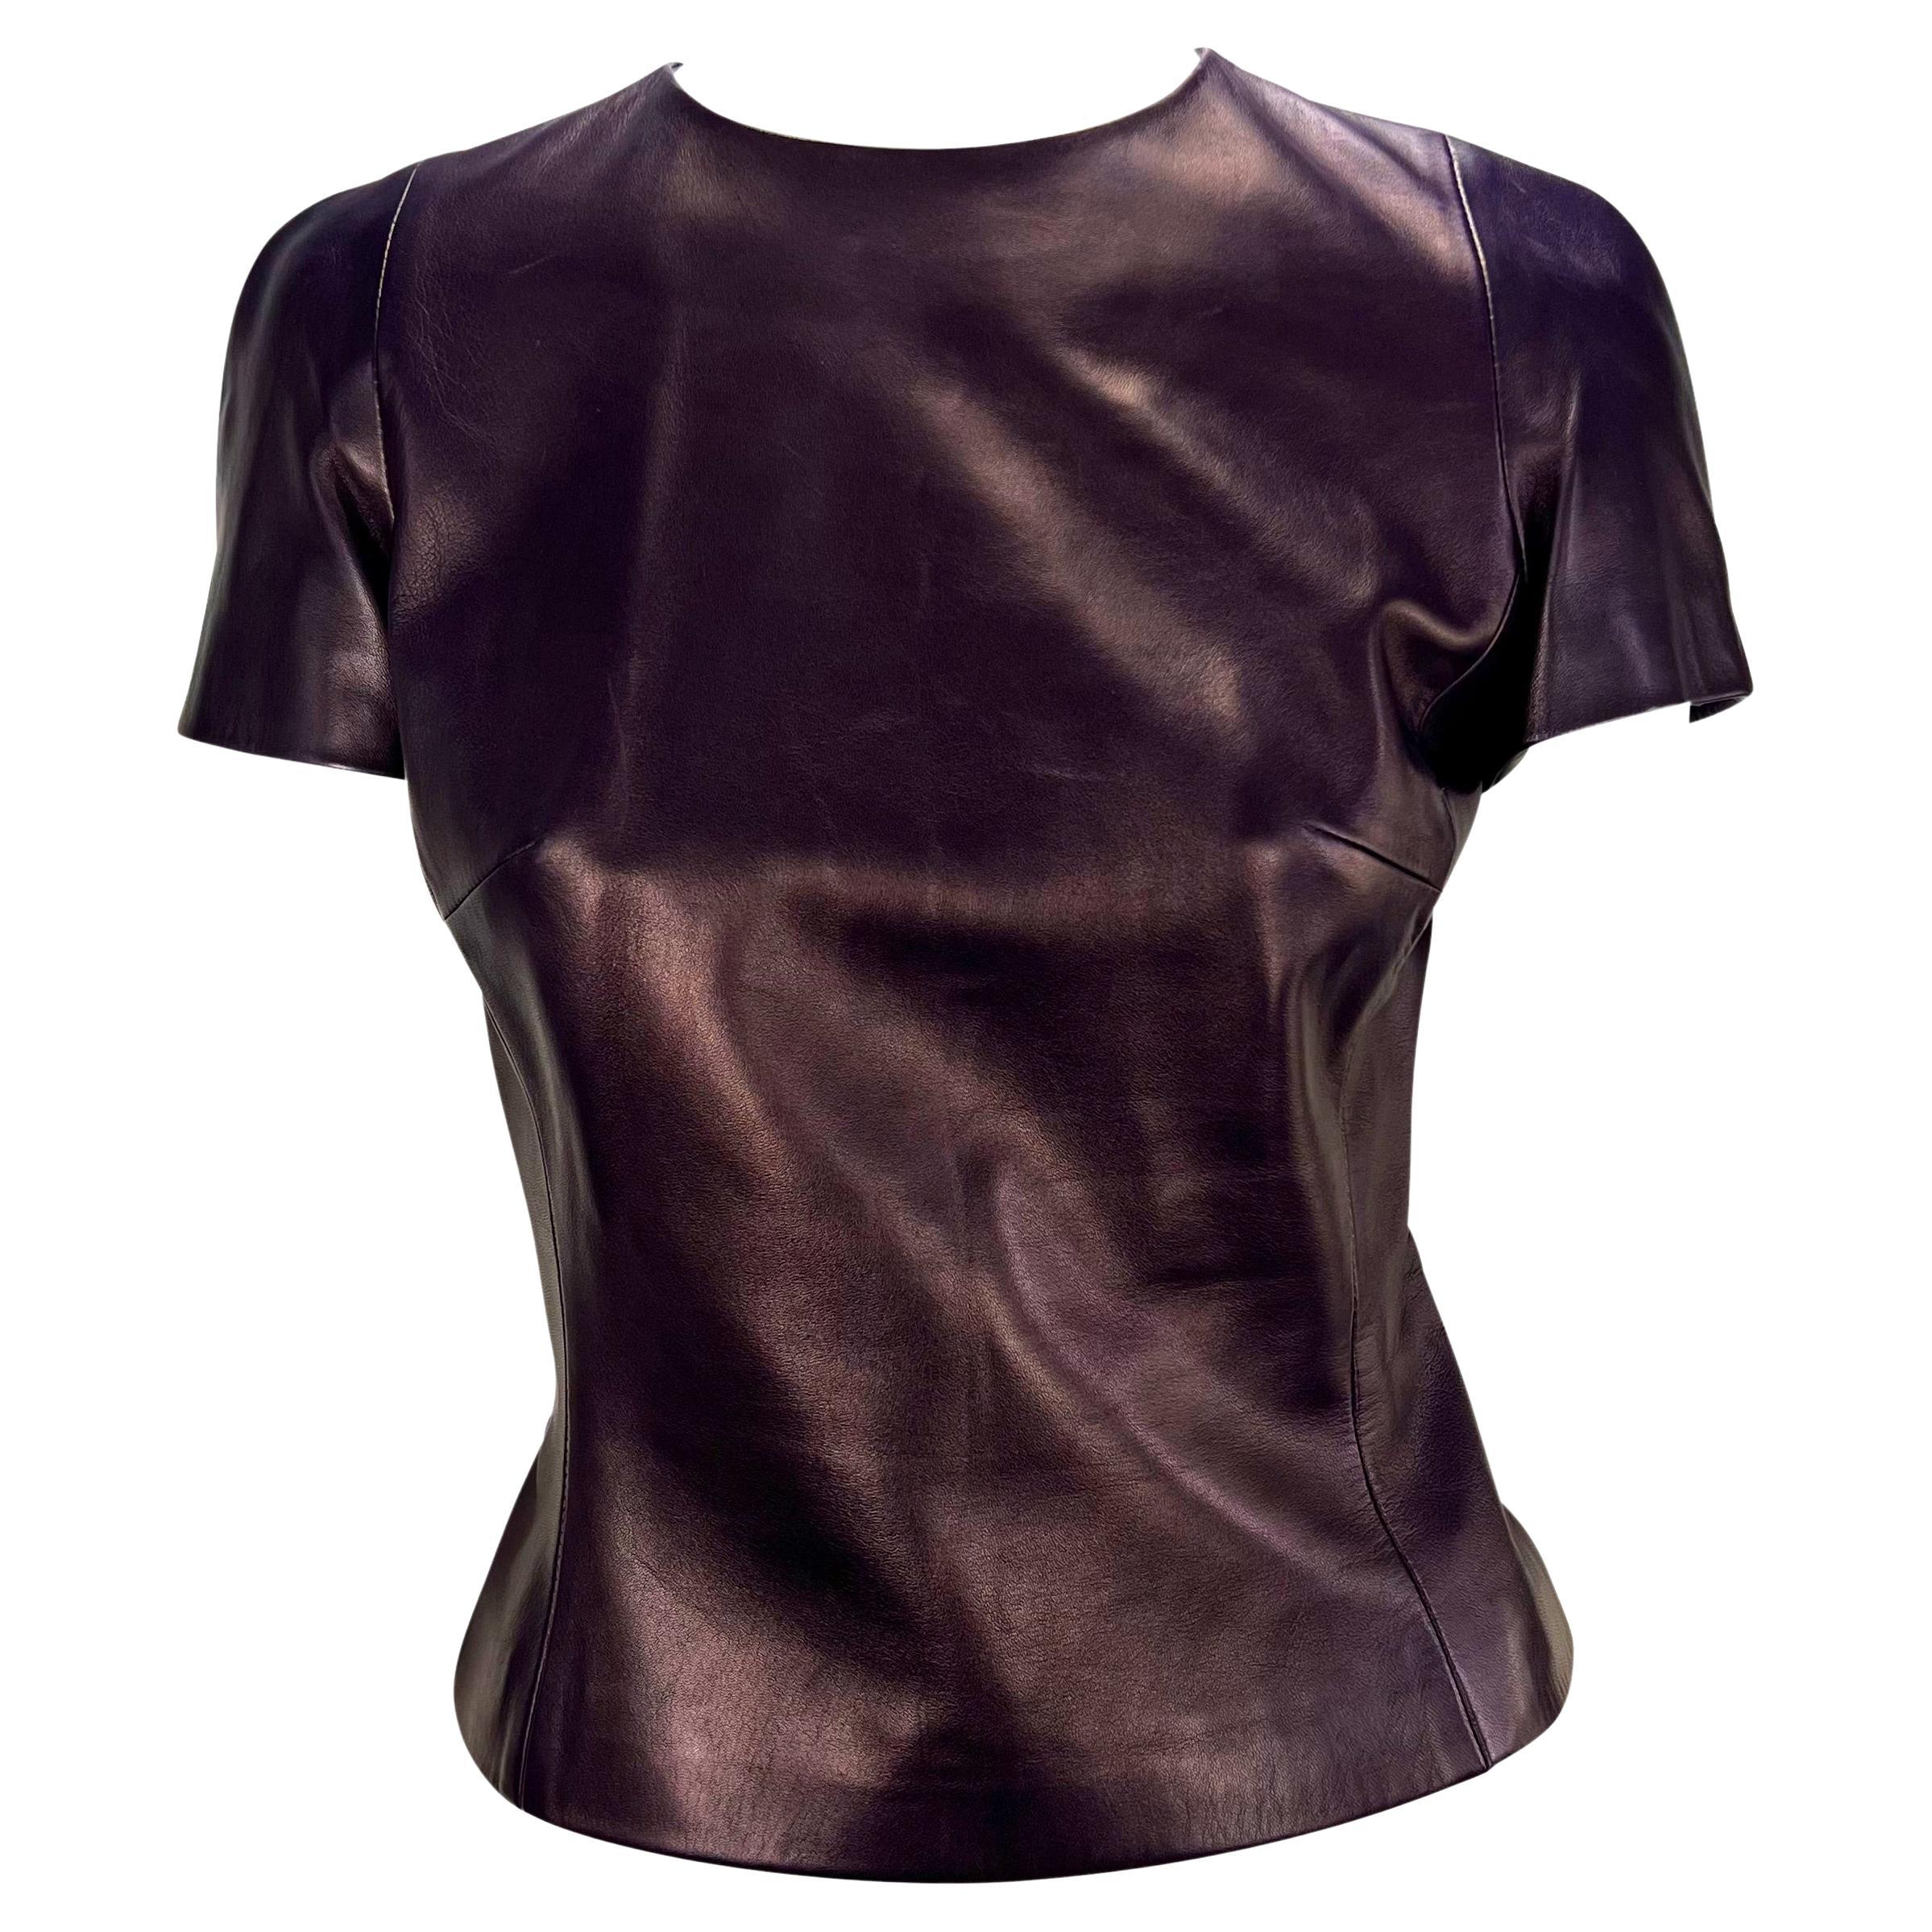 F/W 1995 Gucci by Tom Ford Purple Leather Zip Cropped Top For Sale